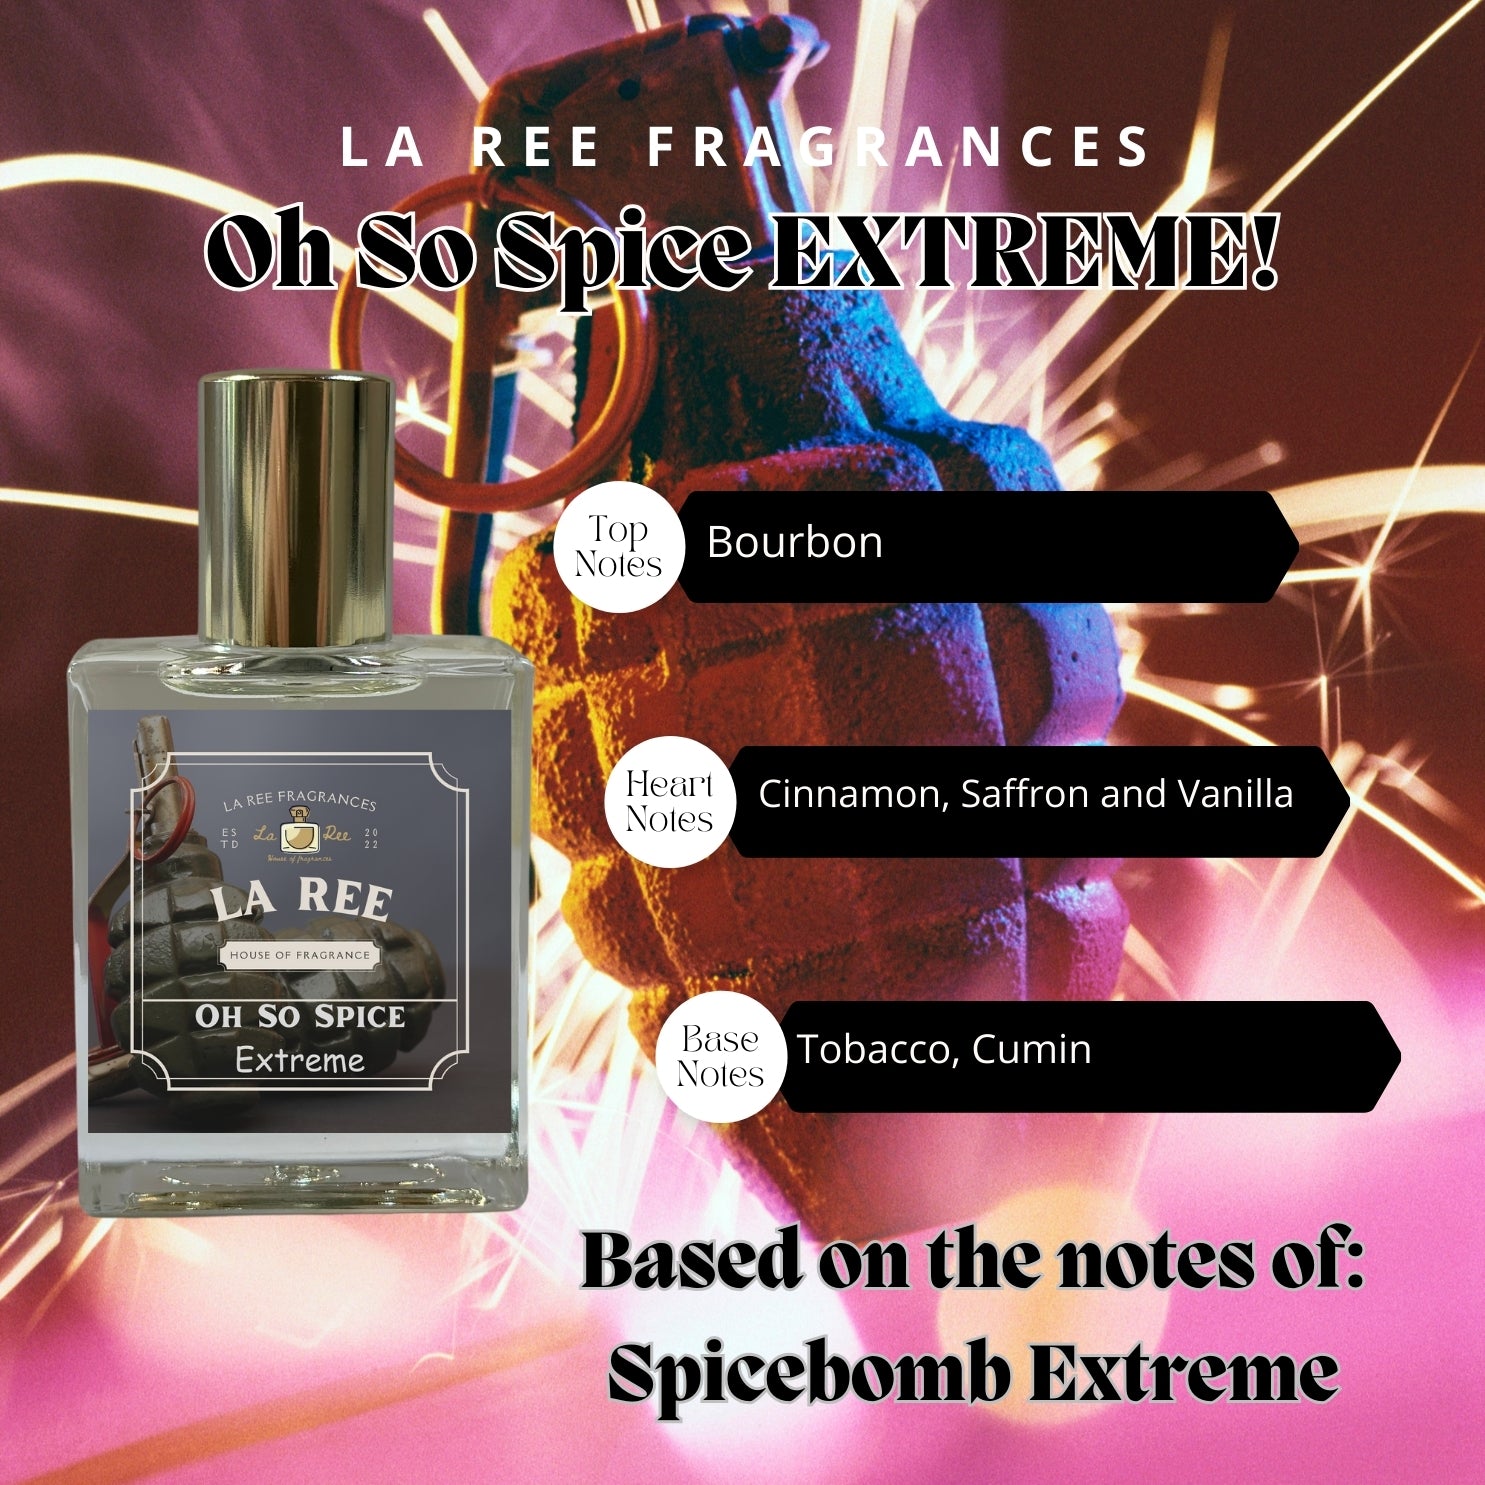 Oh So Spice Extreme inspired by Spicebomb Extreme – La Ree Fragrances